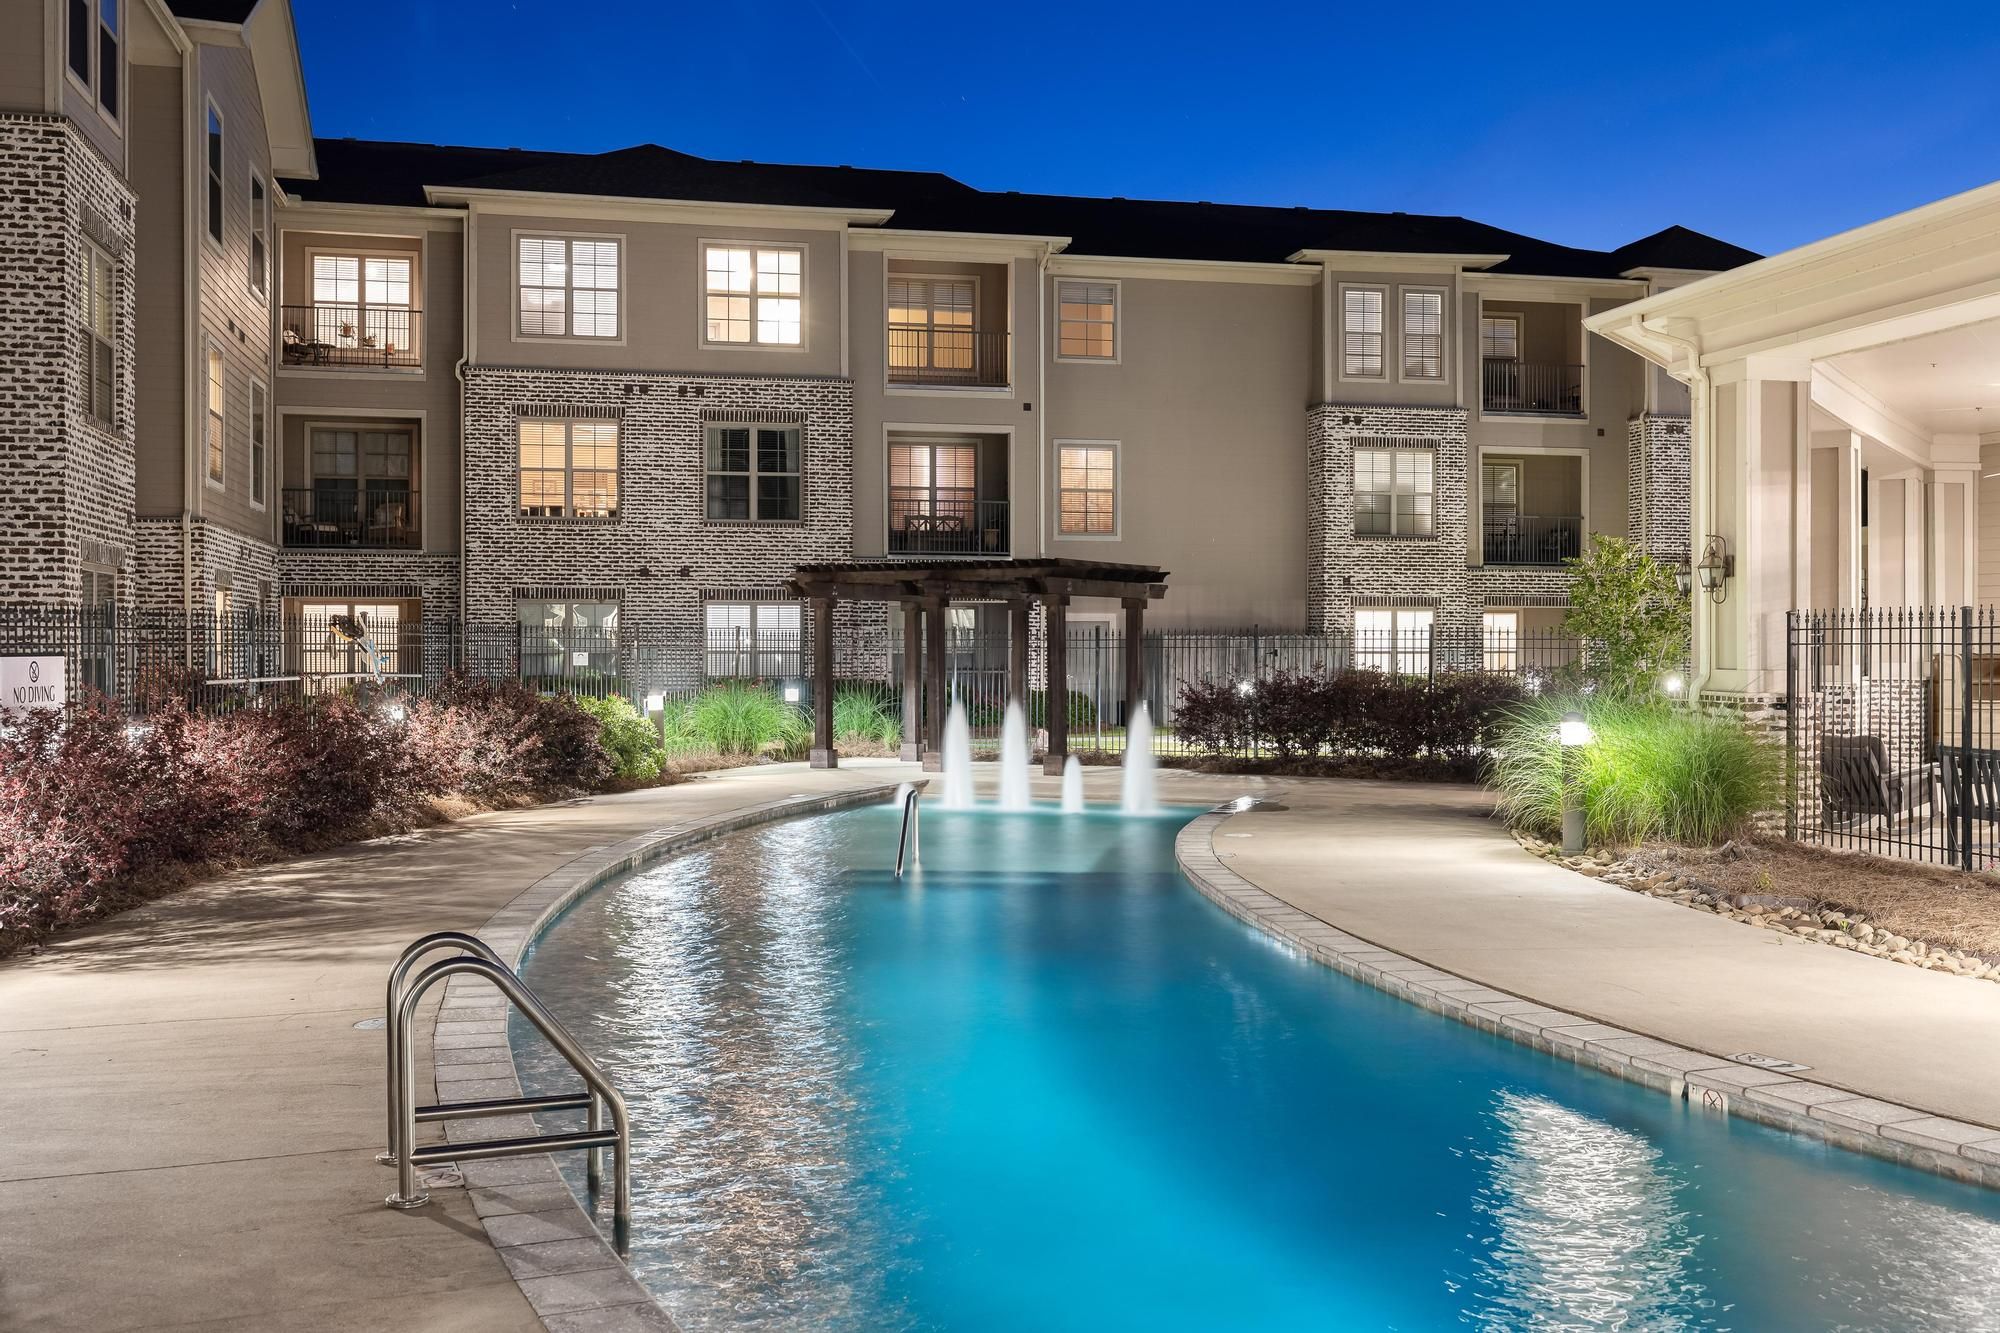 The Claiborne at Hattiesburg senior apartment pool lit at night with fountain and terrace